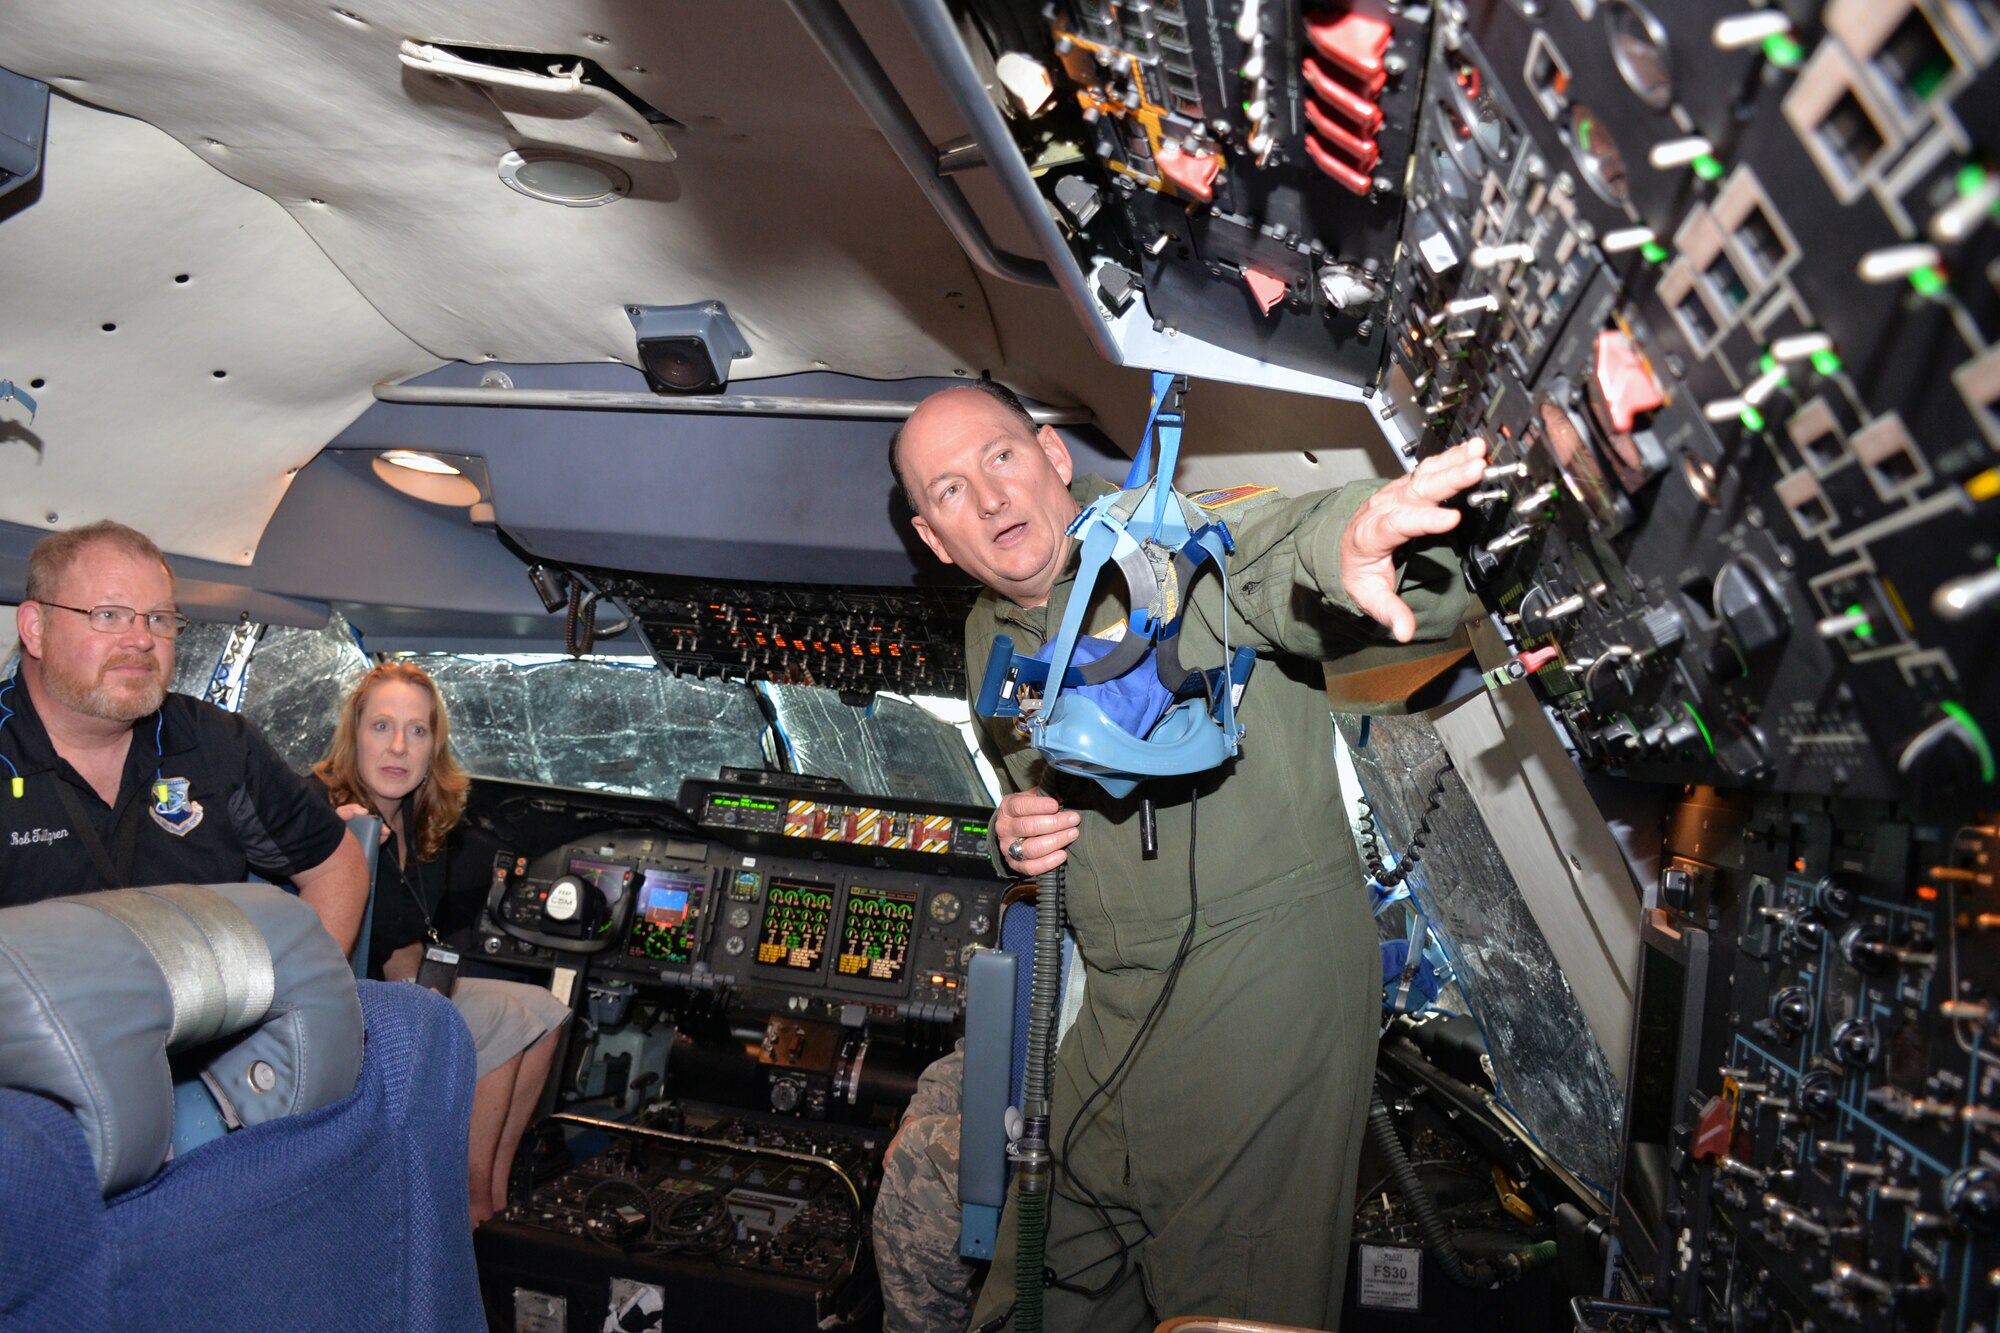 Col. Thomas K. Smith Jr., 433rd Airlift Wing commander, explains functions of aircraft controls on the flight deck of a C-5M Super Galaxy to Bob Tullgren, Air Force Personnel Center manpower authorization manager, and Lori Marcum, AFPC chief of manpower Oct. 2, 2018 at Joint Base San Antonio-Lackland, Texas.